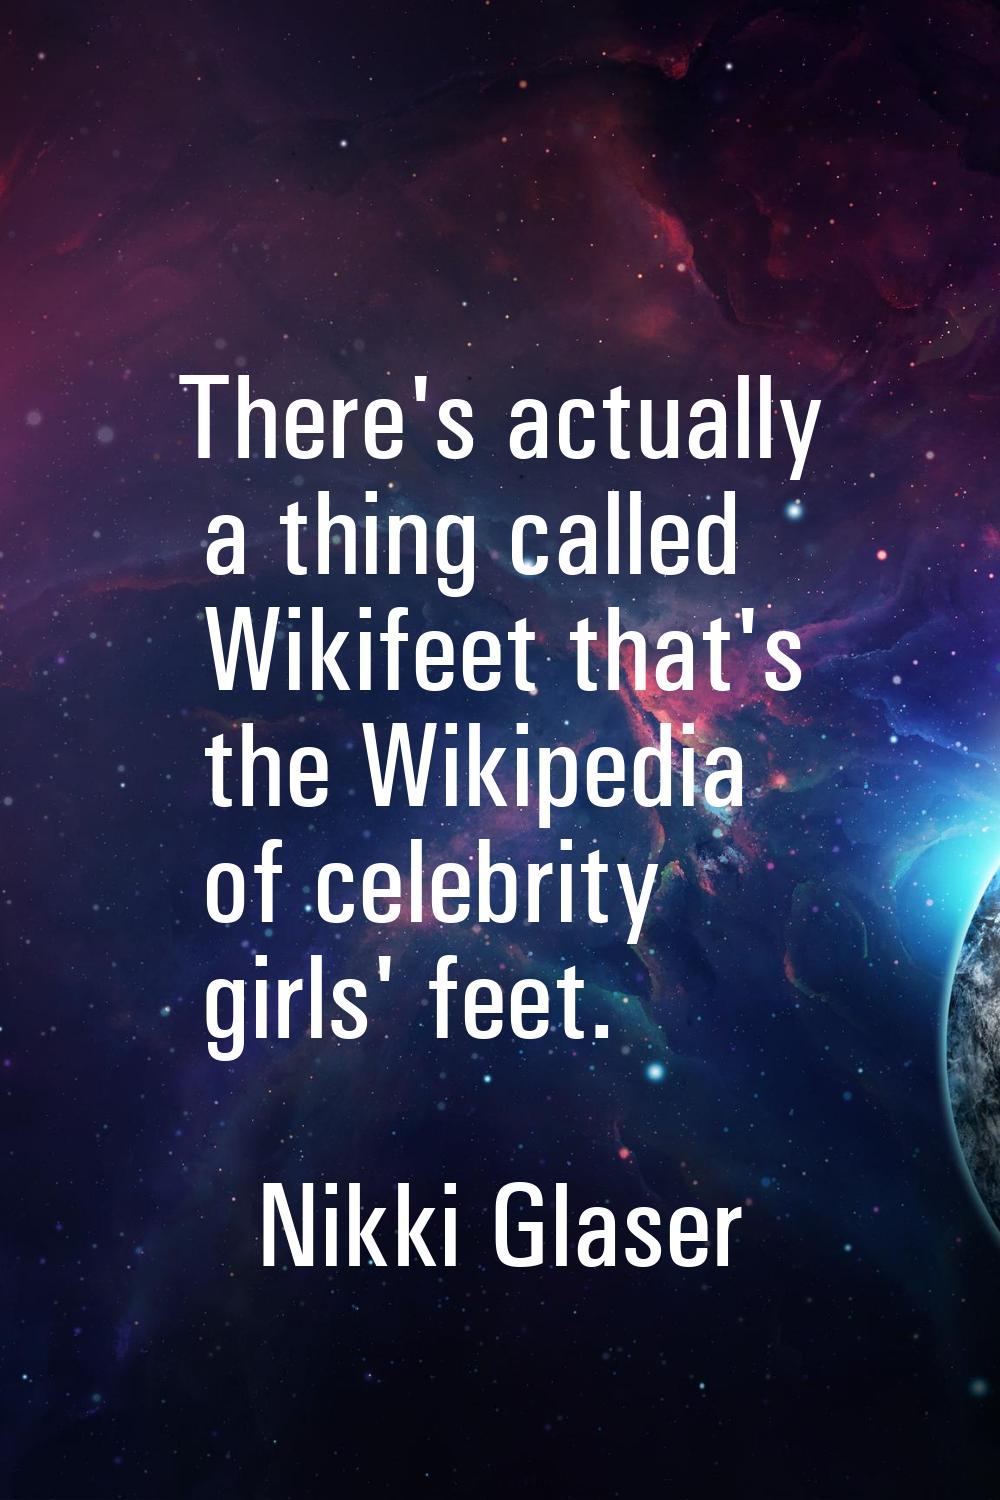 There's actually a thing called Wikifeet that's the Wikipedia of celebrity girls' feet.